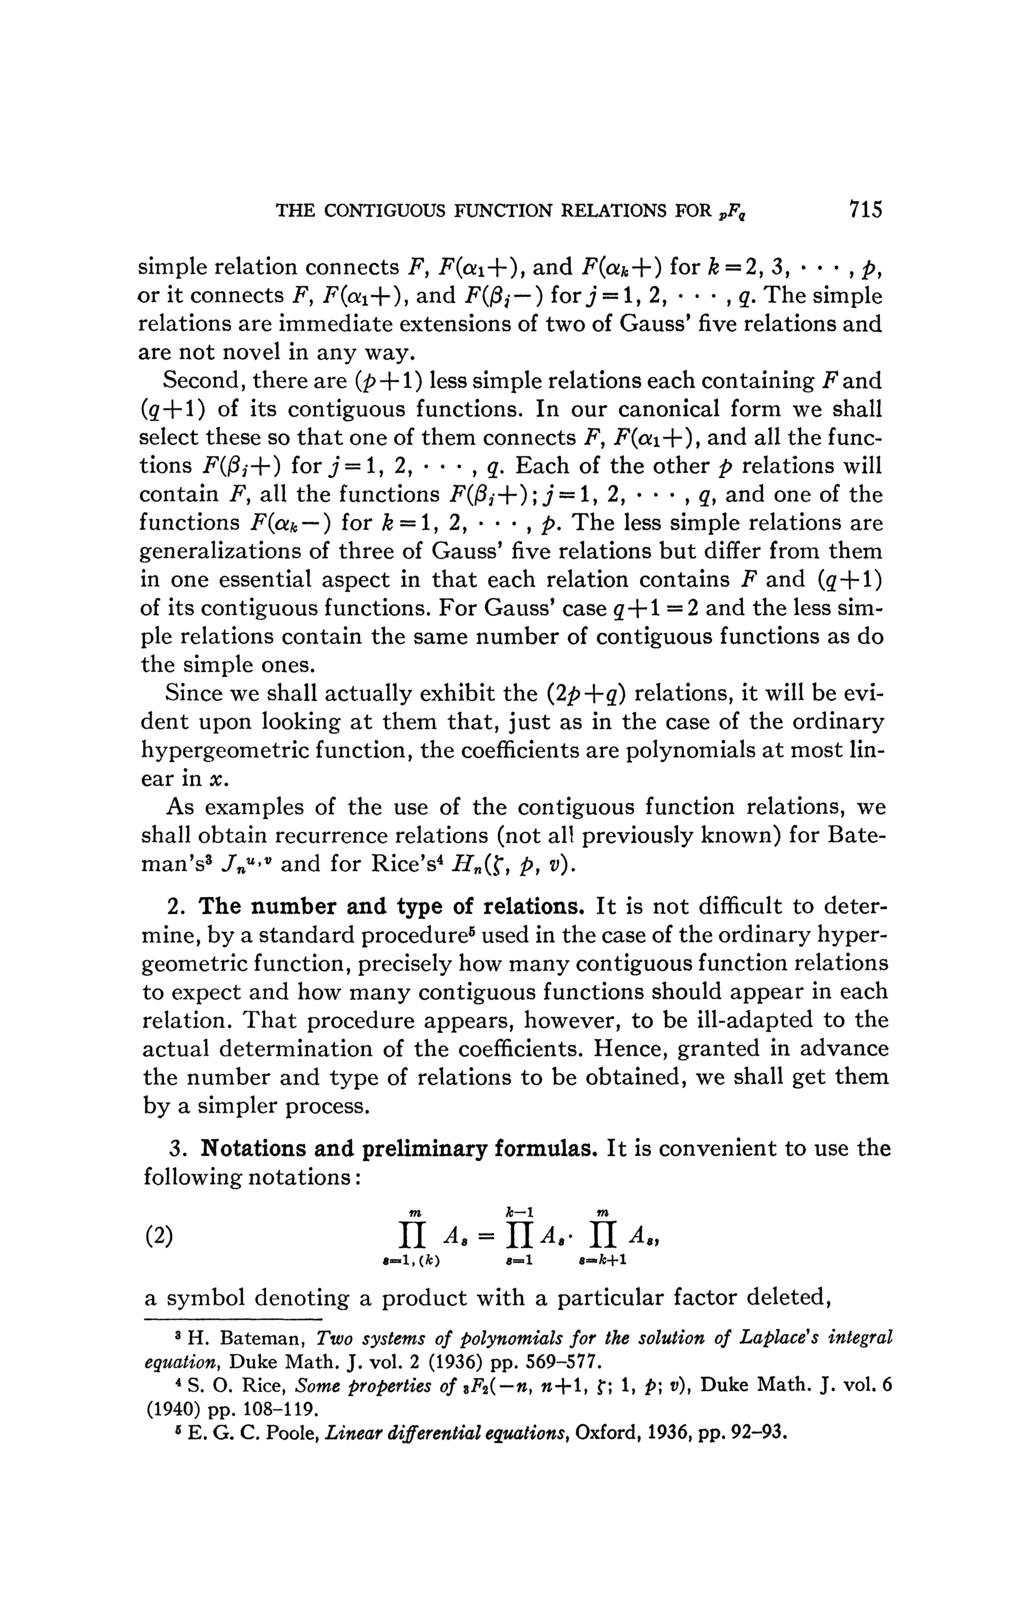 THE CONTIGUOUS FUNCTION RELATIONS FOR pf q 715 simple relation connects F, F(ai+), and F(ak+) for fe = 2, 3,, p, or it connects F, F(ai+), and F(Pj--) for j = l, 2,, q.